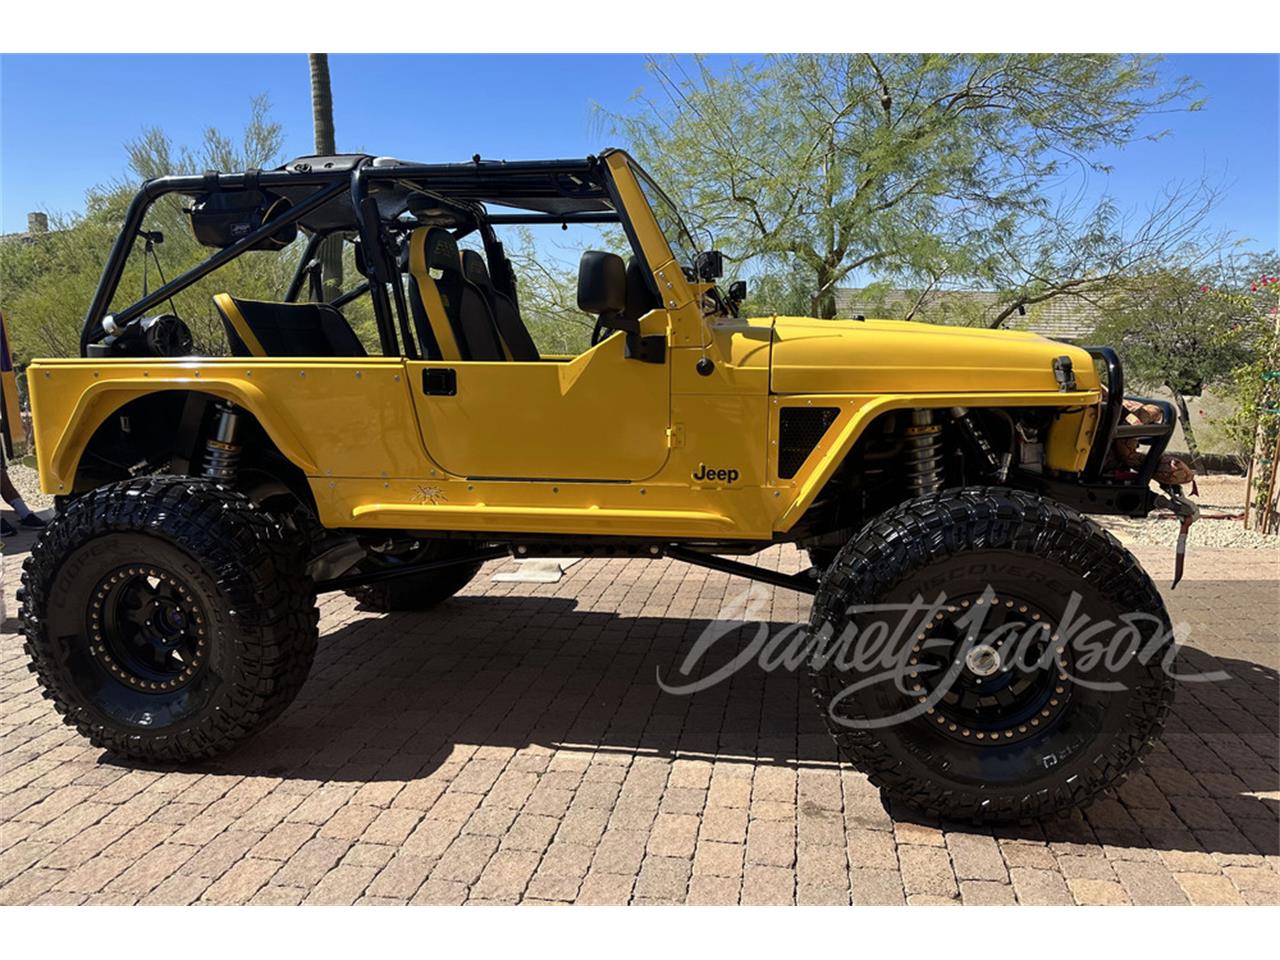 For Sale at Auction: 2005 Jeep Wrangler Rubicon in Scottsdale, Arizona for sale in Scottsdale, AZ